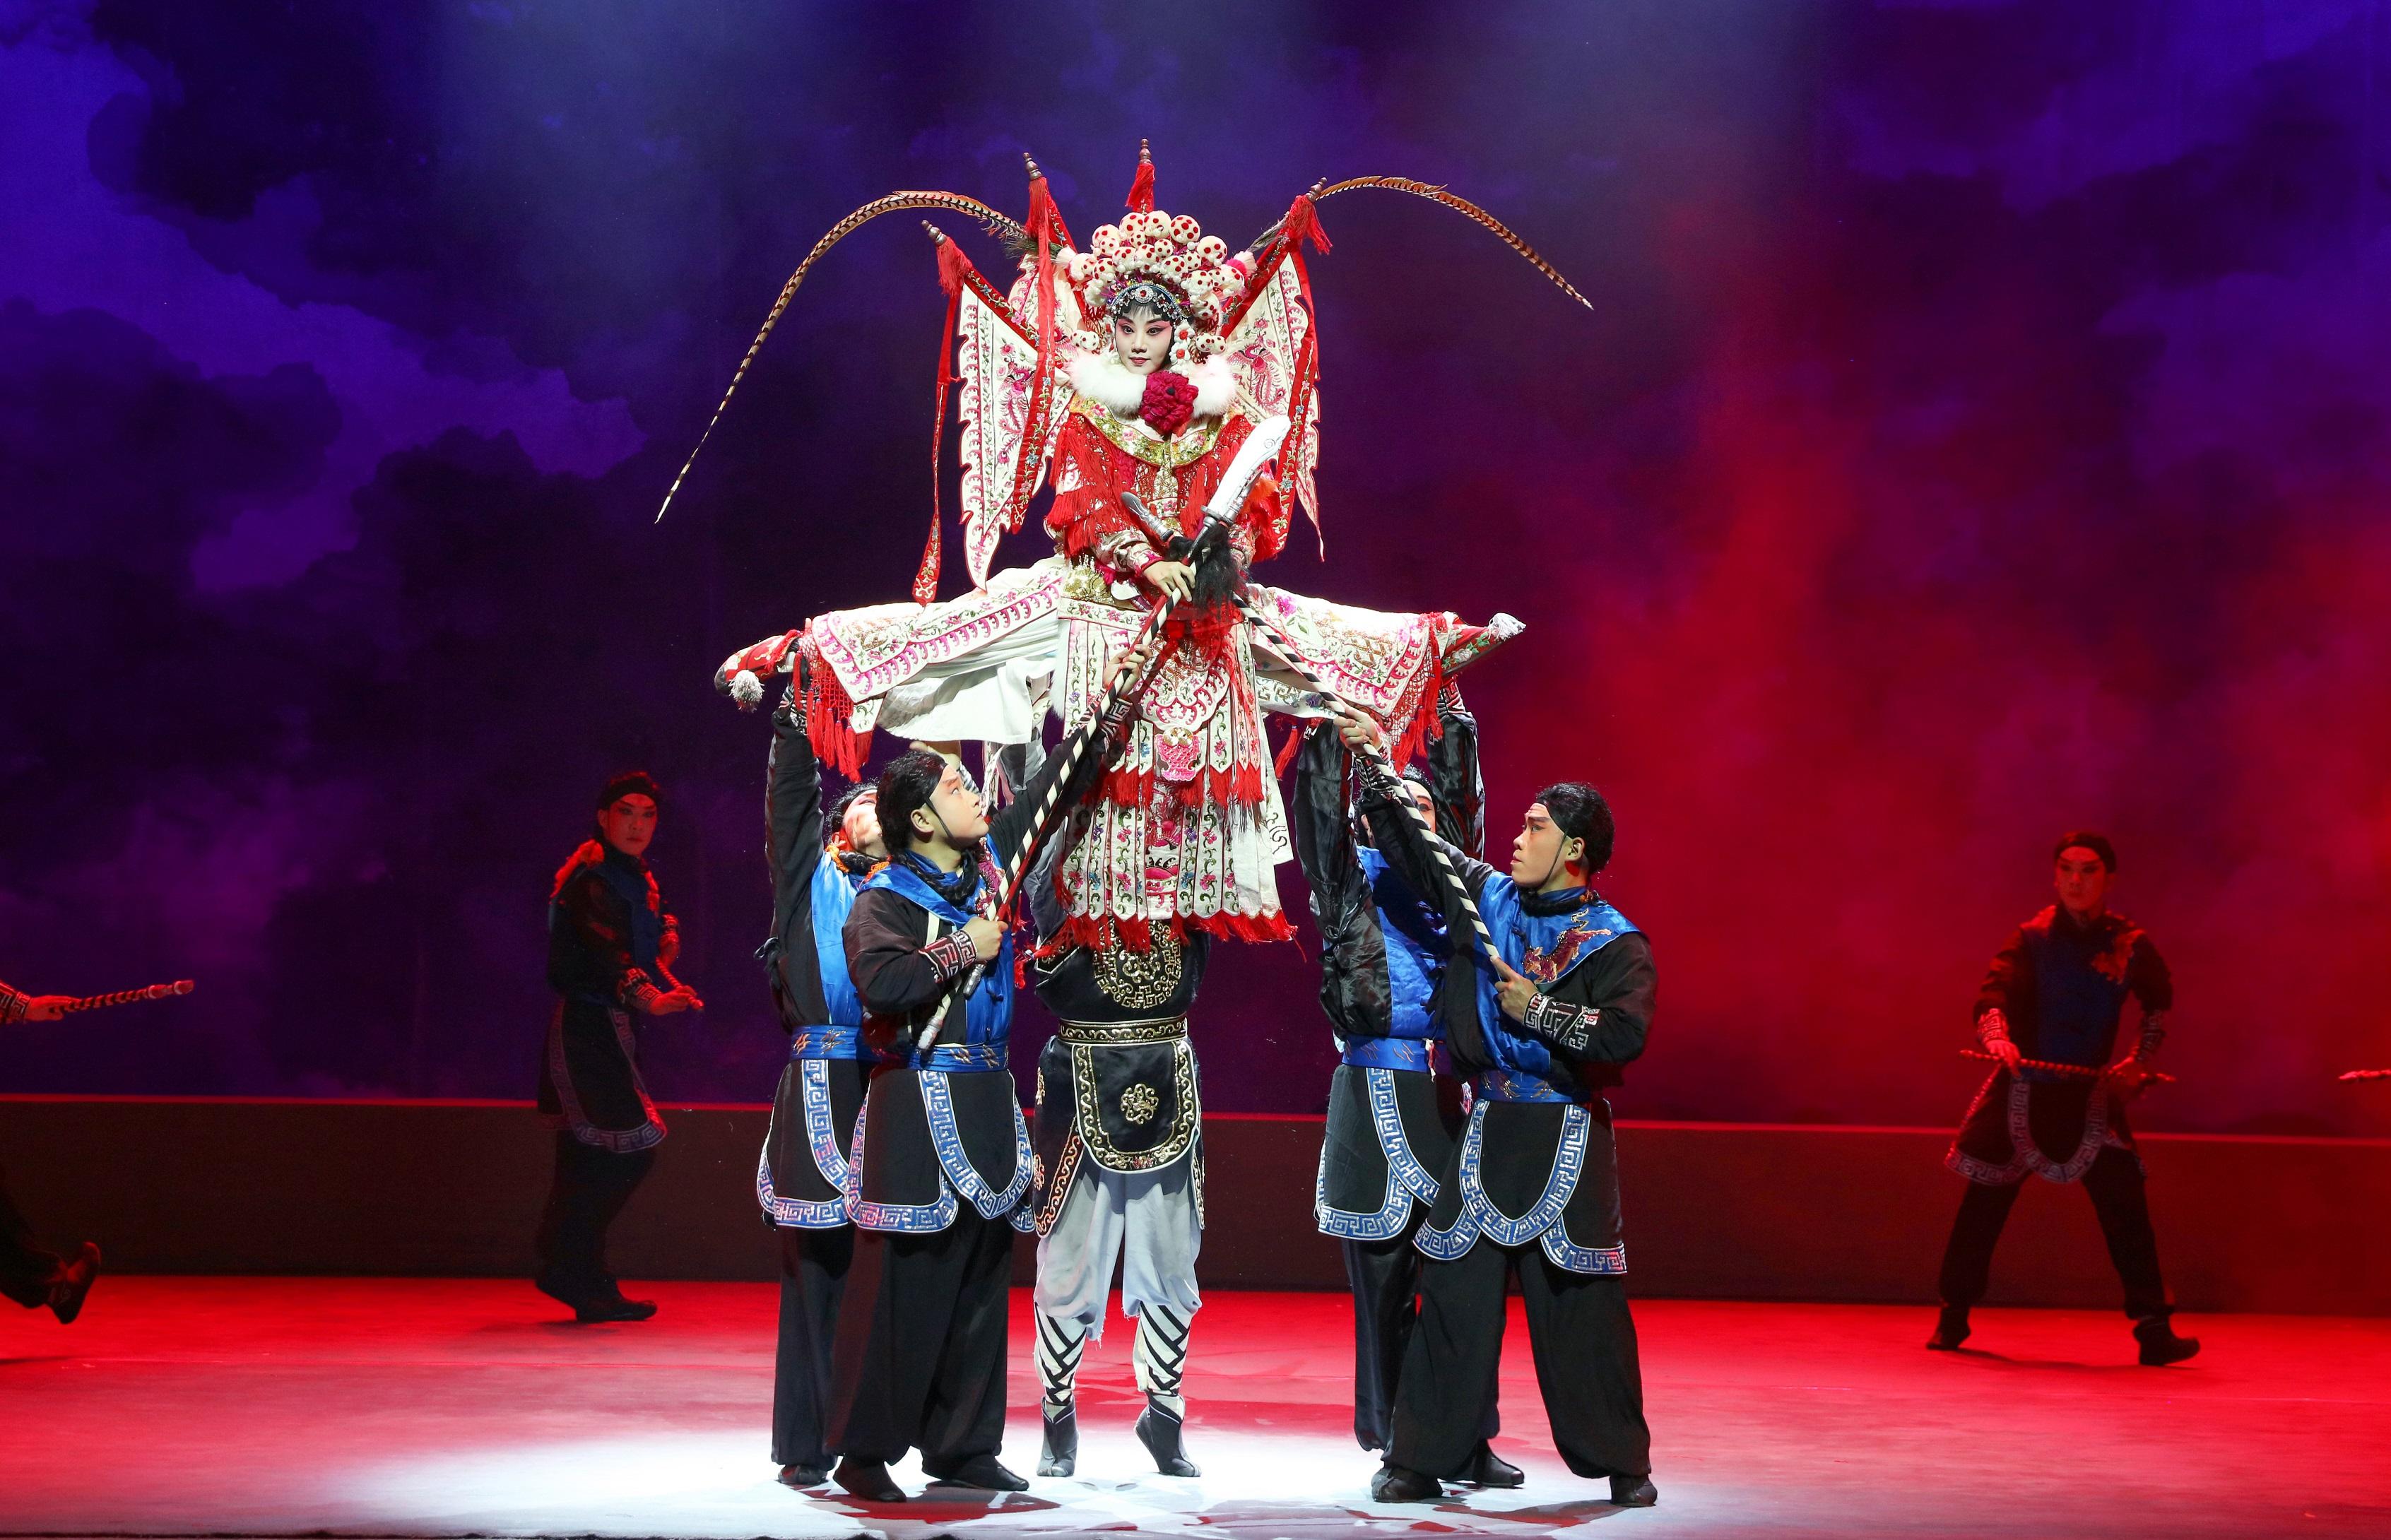 The Leisure and Cultural Services Department will present eight quality programmes at this year's Chinese Opera Festival from June to August. Photo shows a scene from the Wu opera performance "Mu Guiying".